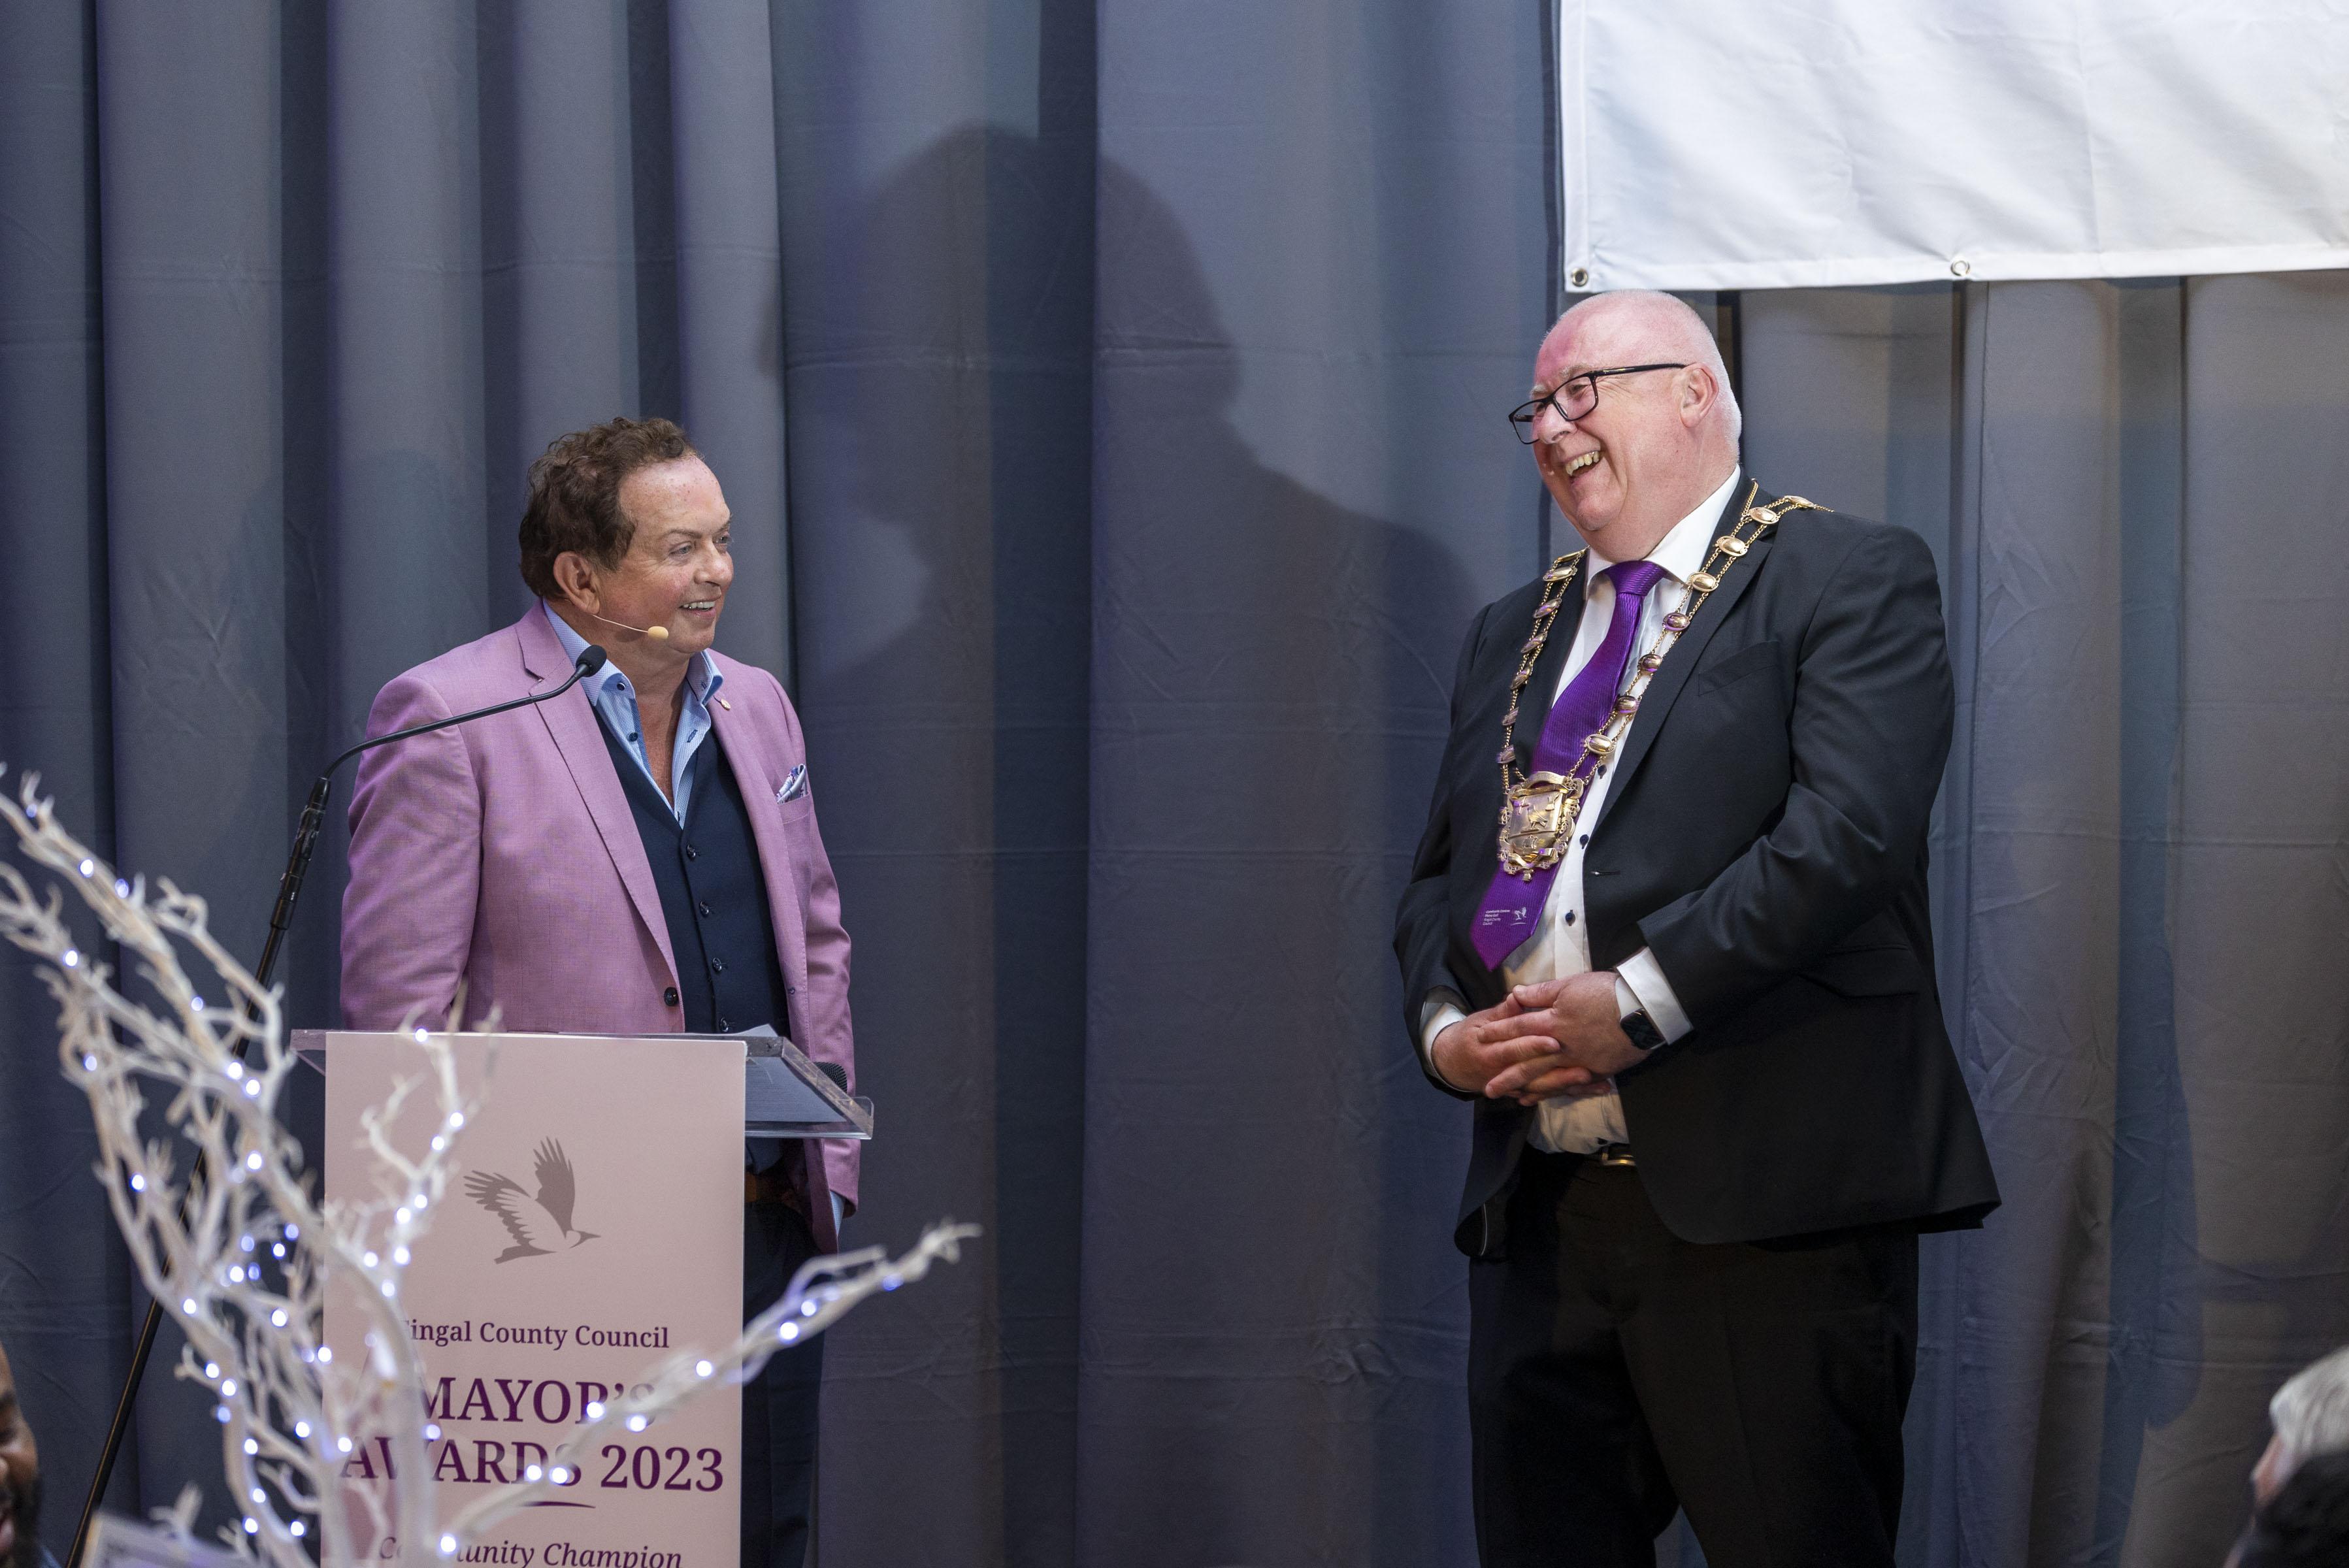 : Mayor of Fingal Cllr Howard Mahony, with Marty Morrissey at the Fingal County Council Mayors Awards 2023, for Community Champions, at the Crowne Plaza Hotel in Blanchardstown, Dublin 15